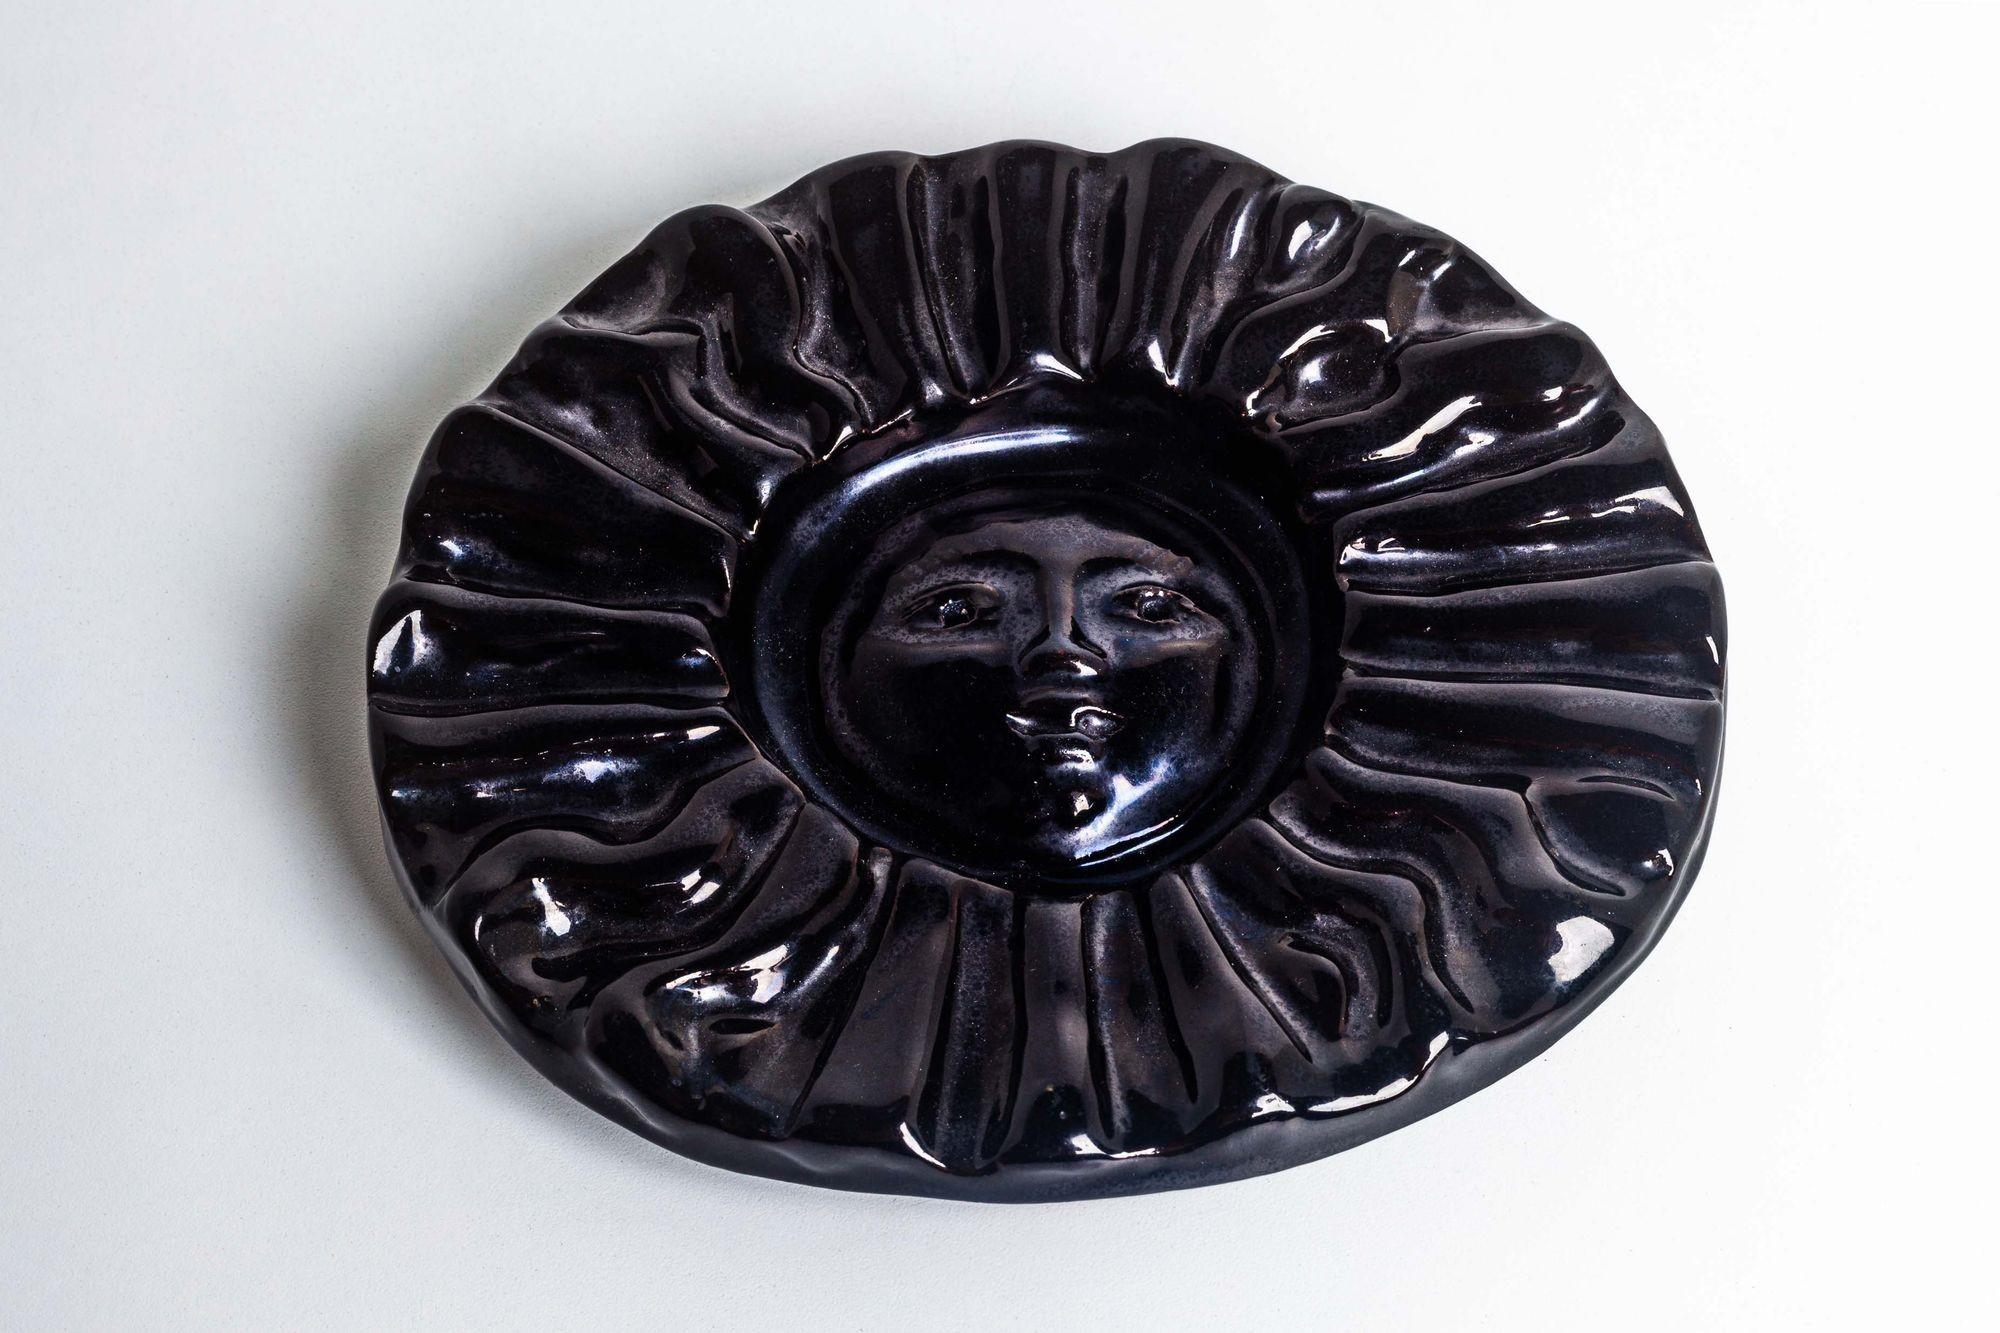 Georges Jouve Soleil Bowl, Black glazed earthenware.
Incised artist's cipher to the underside. 





France, circa 1950

It can hang on the wall.